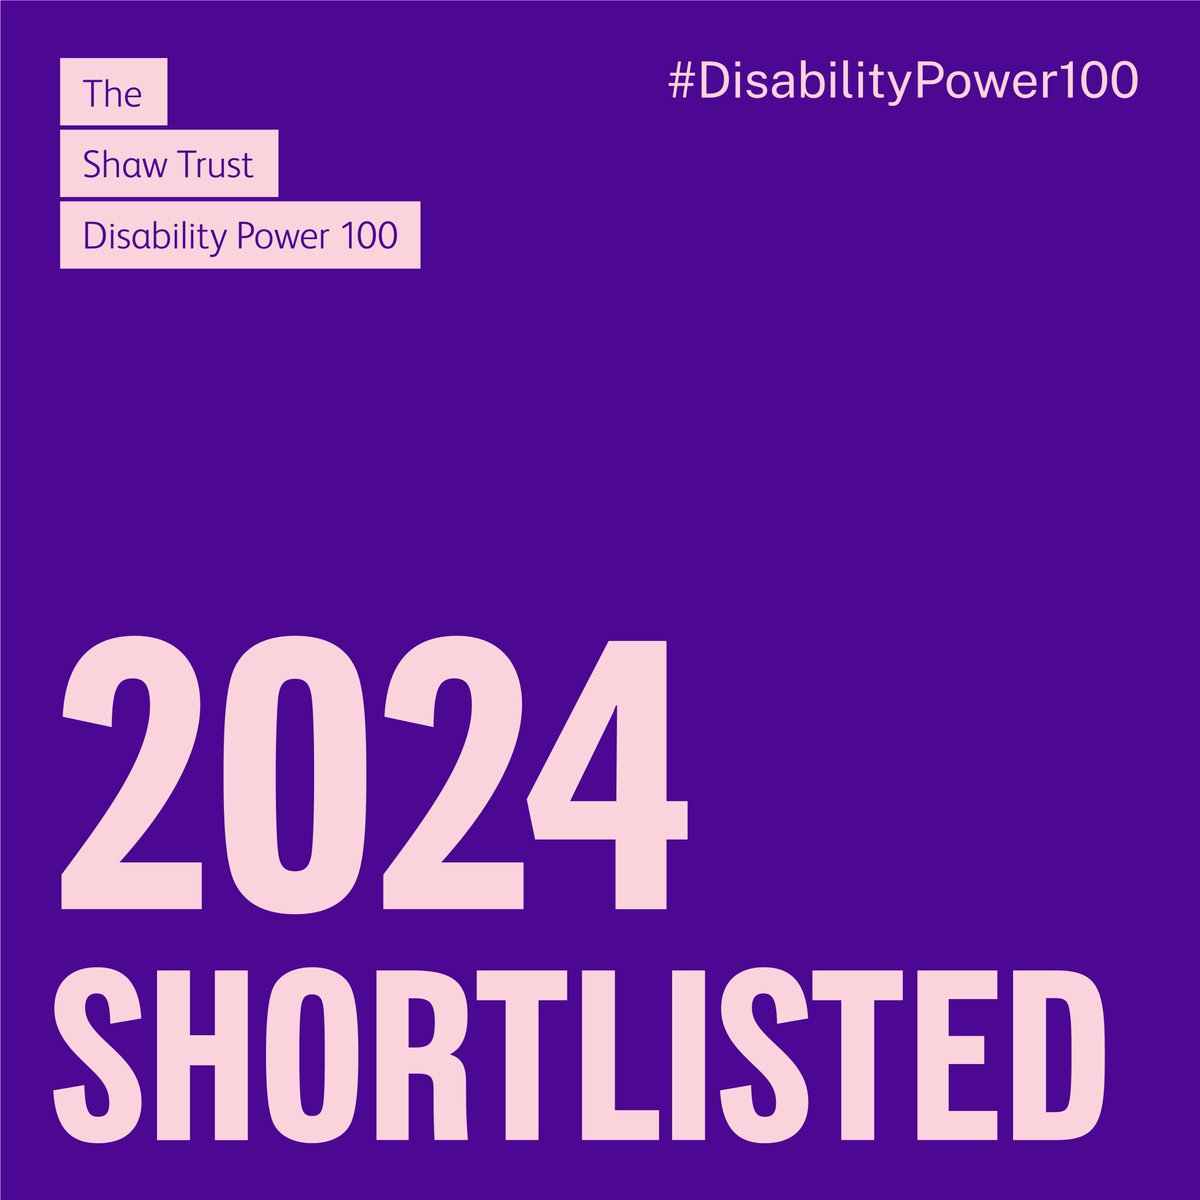 Jo and I are both up for the Disability Power 100! Check us being influential and spoonies. Yay for us!

(I'm shouting about achievements like I tell everyone else to!)

#DisabilityPower100 #SBSWinnersHour